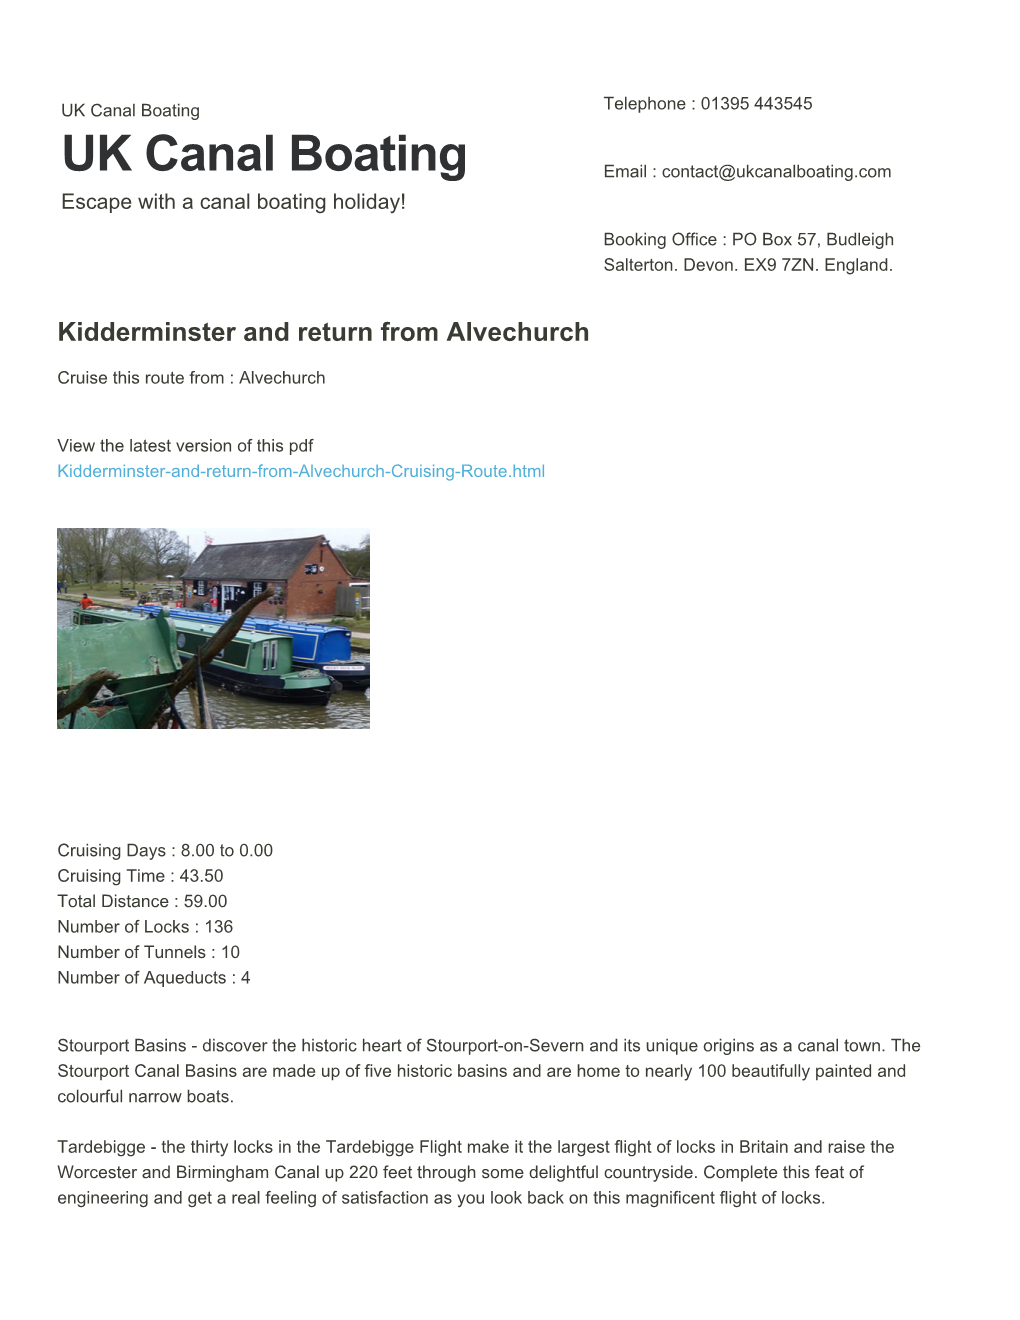 Kidderminster and Return from Alvechurch | UK Canal Boating